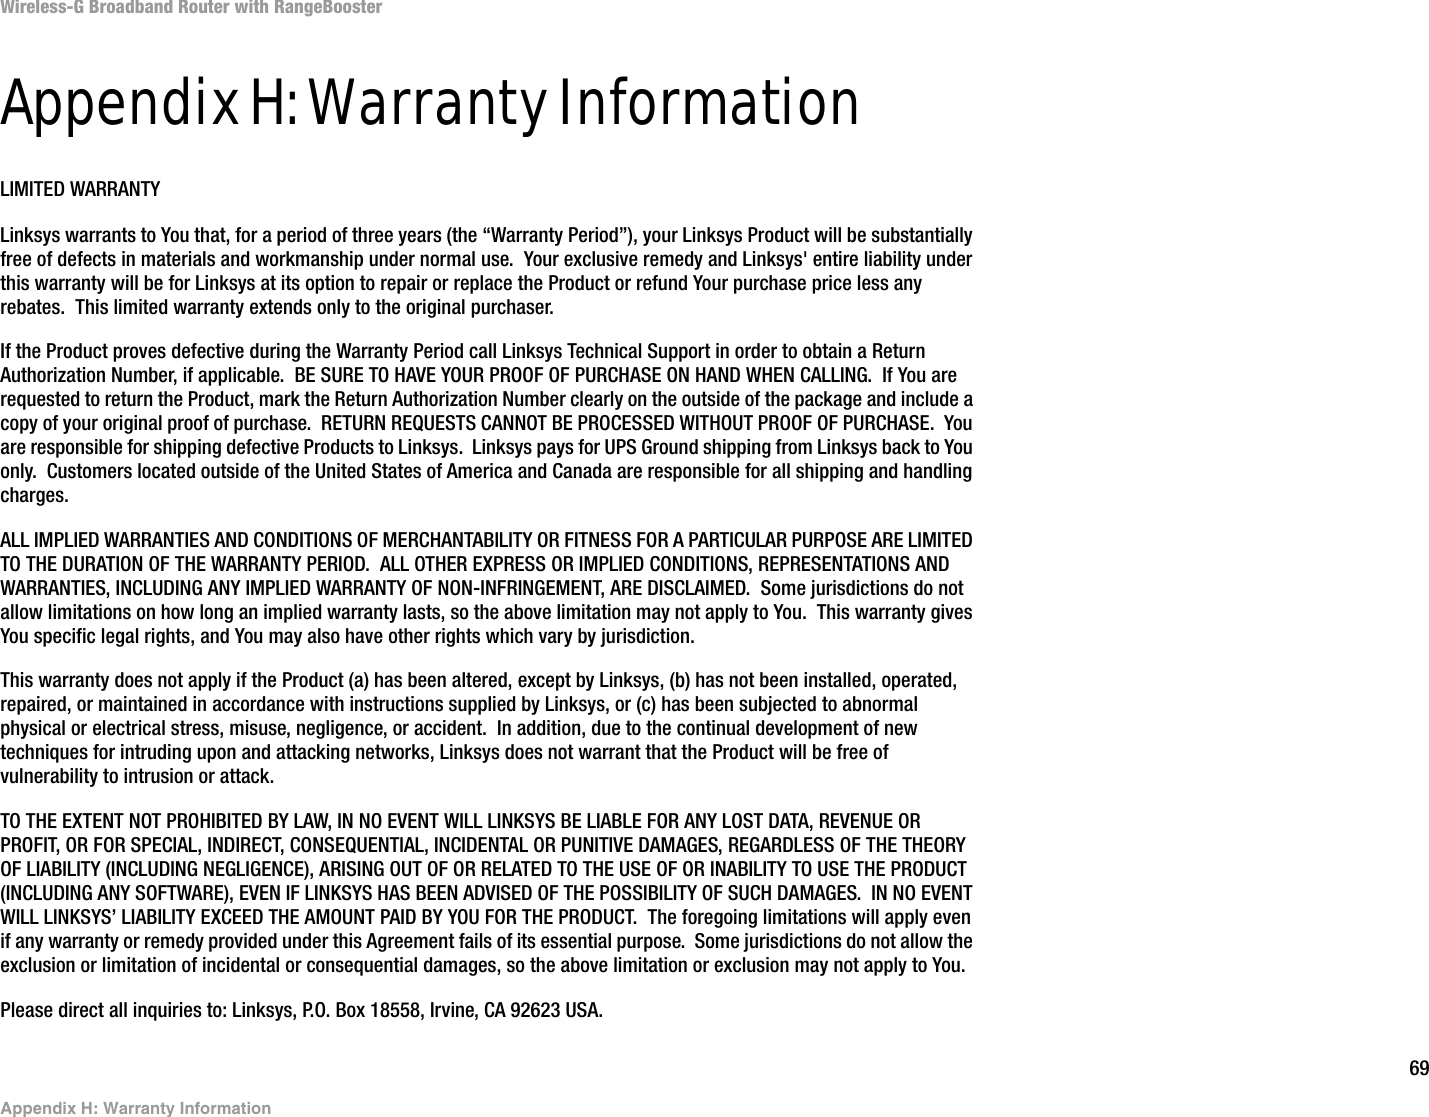 69Appendix H: Warranty InformationWireless-G Broadband Router with RangeBoosterAppendix H: Warranty InformationLIMITED WARRANTYLinksys warrants to You that, for a period of three years (the “Warranty Period”), your Linksys Product will be substantially free of defects in materials and workmanship under normal use.  Your exclusive remedy and Linksys&apos; entire liability under this warranty will be for Linksys at its option to repair or replace the Product or refund Your purchase price less any rebates.  This limited warranty extends only to the original purchaser.  If the Product proves defective during the Warranty Period call Linksys Technical Support in order to obtain a Return Authorization Number, if applicable.  BE SURE TO HAVE YOUR PROOF OF PURCHASE ON HAND WHEN CALLING.  If You are requested to return the Product, mark the Return Authorization Number clearly on the outside of the package and include a copy of your original proof of purchase.  RETURN REQUESTS CANNOT BE PROCESSED WITHOUT PROOF OF PURCHASE.  You are responsible for shipping defective Products to Linksys.  Linksys pays for UPS Ground shipping from Linksys back to You only.  Customers located outside of the United States of America and Canada are responsible for all shipping and handling charges. ALL IMPLIED WARRANTIES AND CONDITIONS OF MERCHANTABILITY OR FITNESS FOR A PARTICULAR PURPOSE ARE LIMITED TO THE DURATION OF THE WARRANTY PERIOD.  ALL OTHER EXPRESS OR IMPLIED CONDITIONS, REPRESENTATIONS AND WARRANTIES, INCLUDING ANY IMPLIED WARRANTY OF NON-INFRINGEMENT, ARE DISCLAIMED.  Some jurisdictions do not allow limitations on how long an implied warranty lasts, so the above limitation may not apply to You.  This warranty gives You specific legal rights, and You may also have other rights which vary by jurisdiction.This warranty does not apply if the Product (a) has been altered, except by Linksys, (b) has not been installed, operated, repaired, or maintained in accordance with instructions supplied by Linksys, or (c) has been subjected to abnormal physical or electrical stress, misuse, negligence, or accident.  In addition, due to the continual development of new techniques for intruding upon and attacking networks, Linksys does not warrant that the Product will be free of vulnerability to intrusion or attack.TO THE EXTENT NOT PROHIBITED BY LAW, IN NO EVENT WILL LINKSYS BE LIABLE FOR ANY LOST DATA, REVENUE OR PROFIT, OR FOR SPECIAL, INDIRECT, CONSEQUENTIAL, INCIDENTAL OR PUNITIVE DAMAGES, REGARDLESS OF THE THEORY OF LIABILITY (INCLUDING NEGLIGENCE), ARISING OUT OF OR RELATED TO THE USE OF OR INABILITY TO USE THE PRODUCT (INCLUDING ANY SOFTWARE), EVEN IF LINKSYS HAS BEEN ADVISED OF THE POSSIBILITY OF SUCH DAMAGES.  IN NO EVENT WILL LINKSYS’ LIABILITY EXCEED THE AMOUNT PAID BY YOU FOR THE PRODUCT.  The foregoing limitations will apply even if any warranty or remedy provided under this Agreement fails of its essential purpose.  Some jurisdictions do not allow the exclusion or limitation of incidental or consequential damages, so the above limitation or exclusion may not apply to You.Please direct all inquiries to: Linksys, P.O. Box 18558, Irvine, CA 92623 USA.